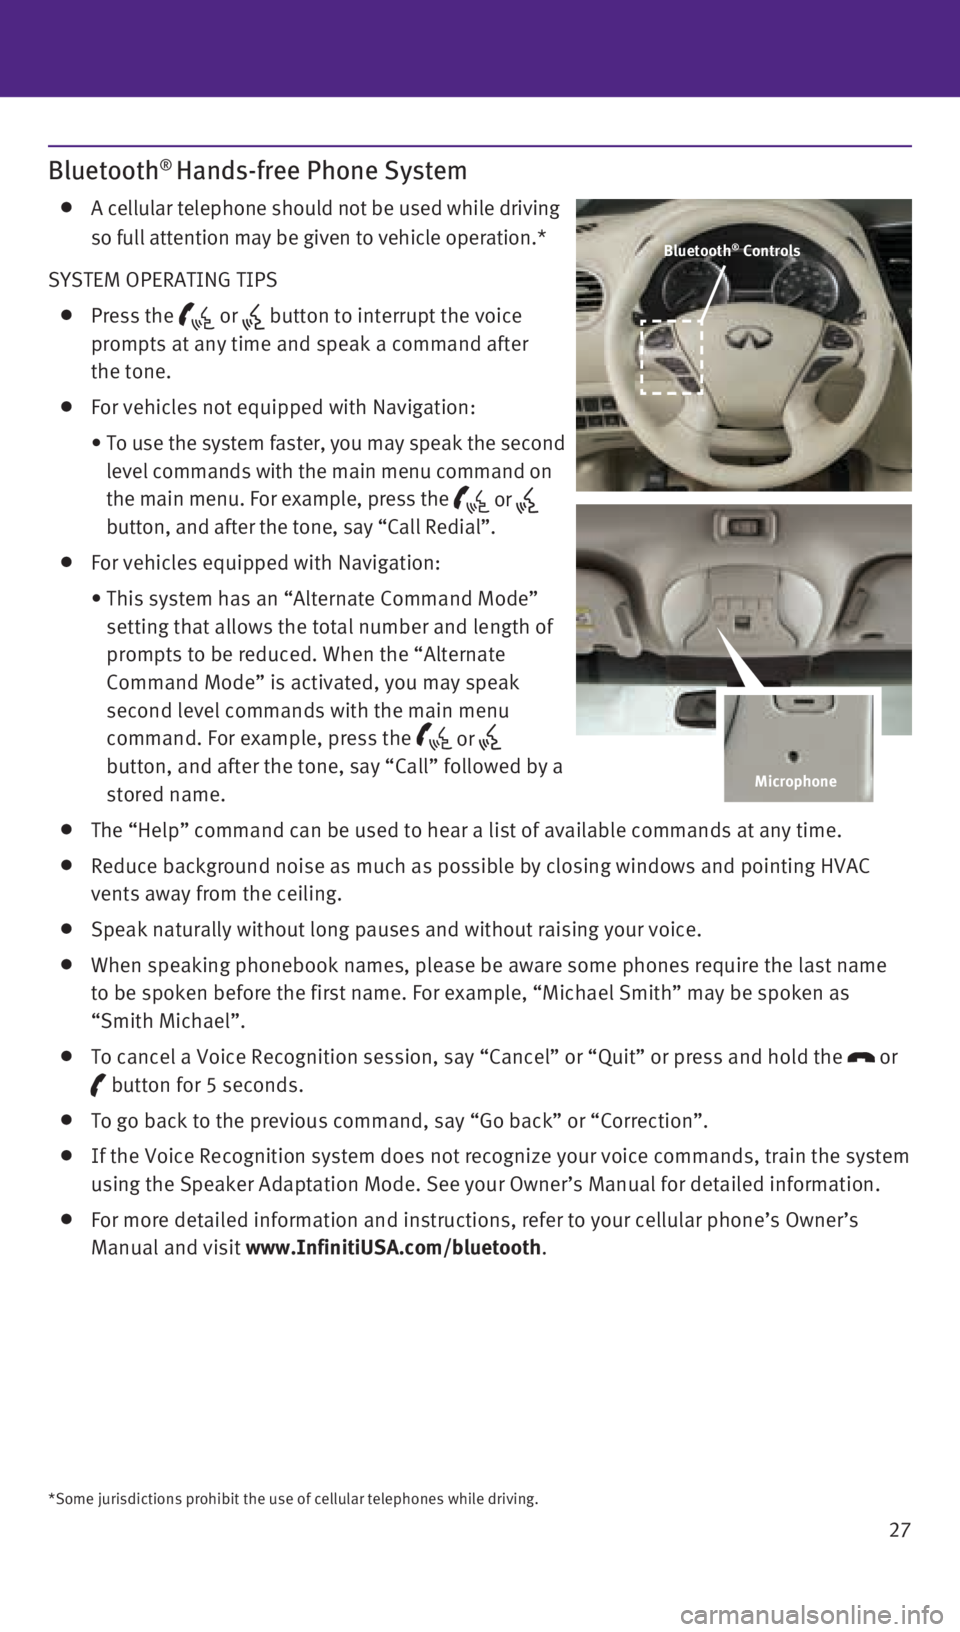 INFINITI QX60 2015  Quick Reference Guide 27
Bluetooth® Hands-free Phone System
    A cellular telephone should not be used while driving   
so full attention may be given to vehicle operation.*
SYSTEM OPERATING TIPS
 
   Press  the  or  but